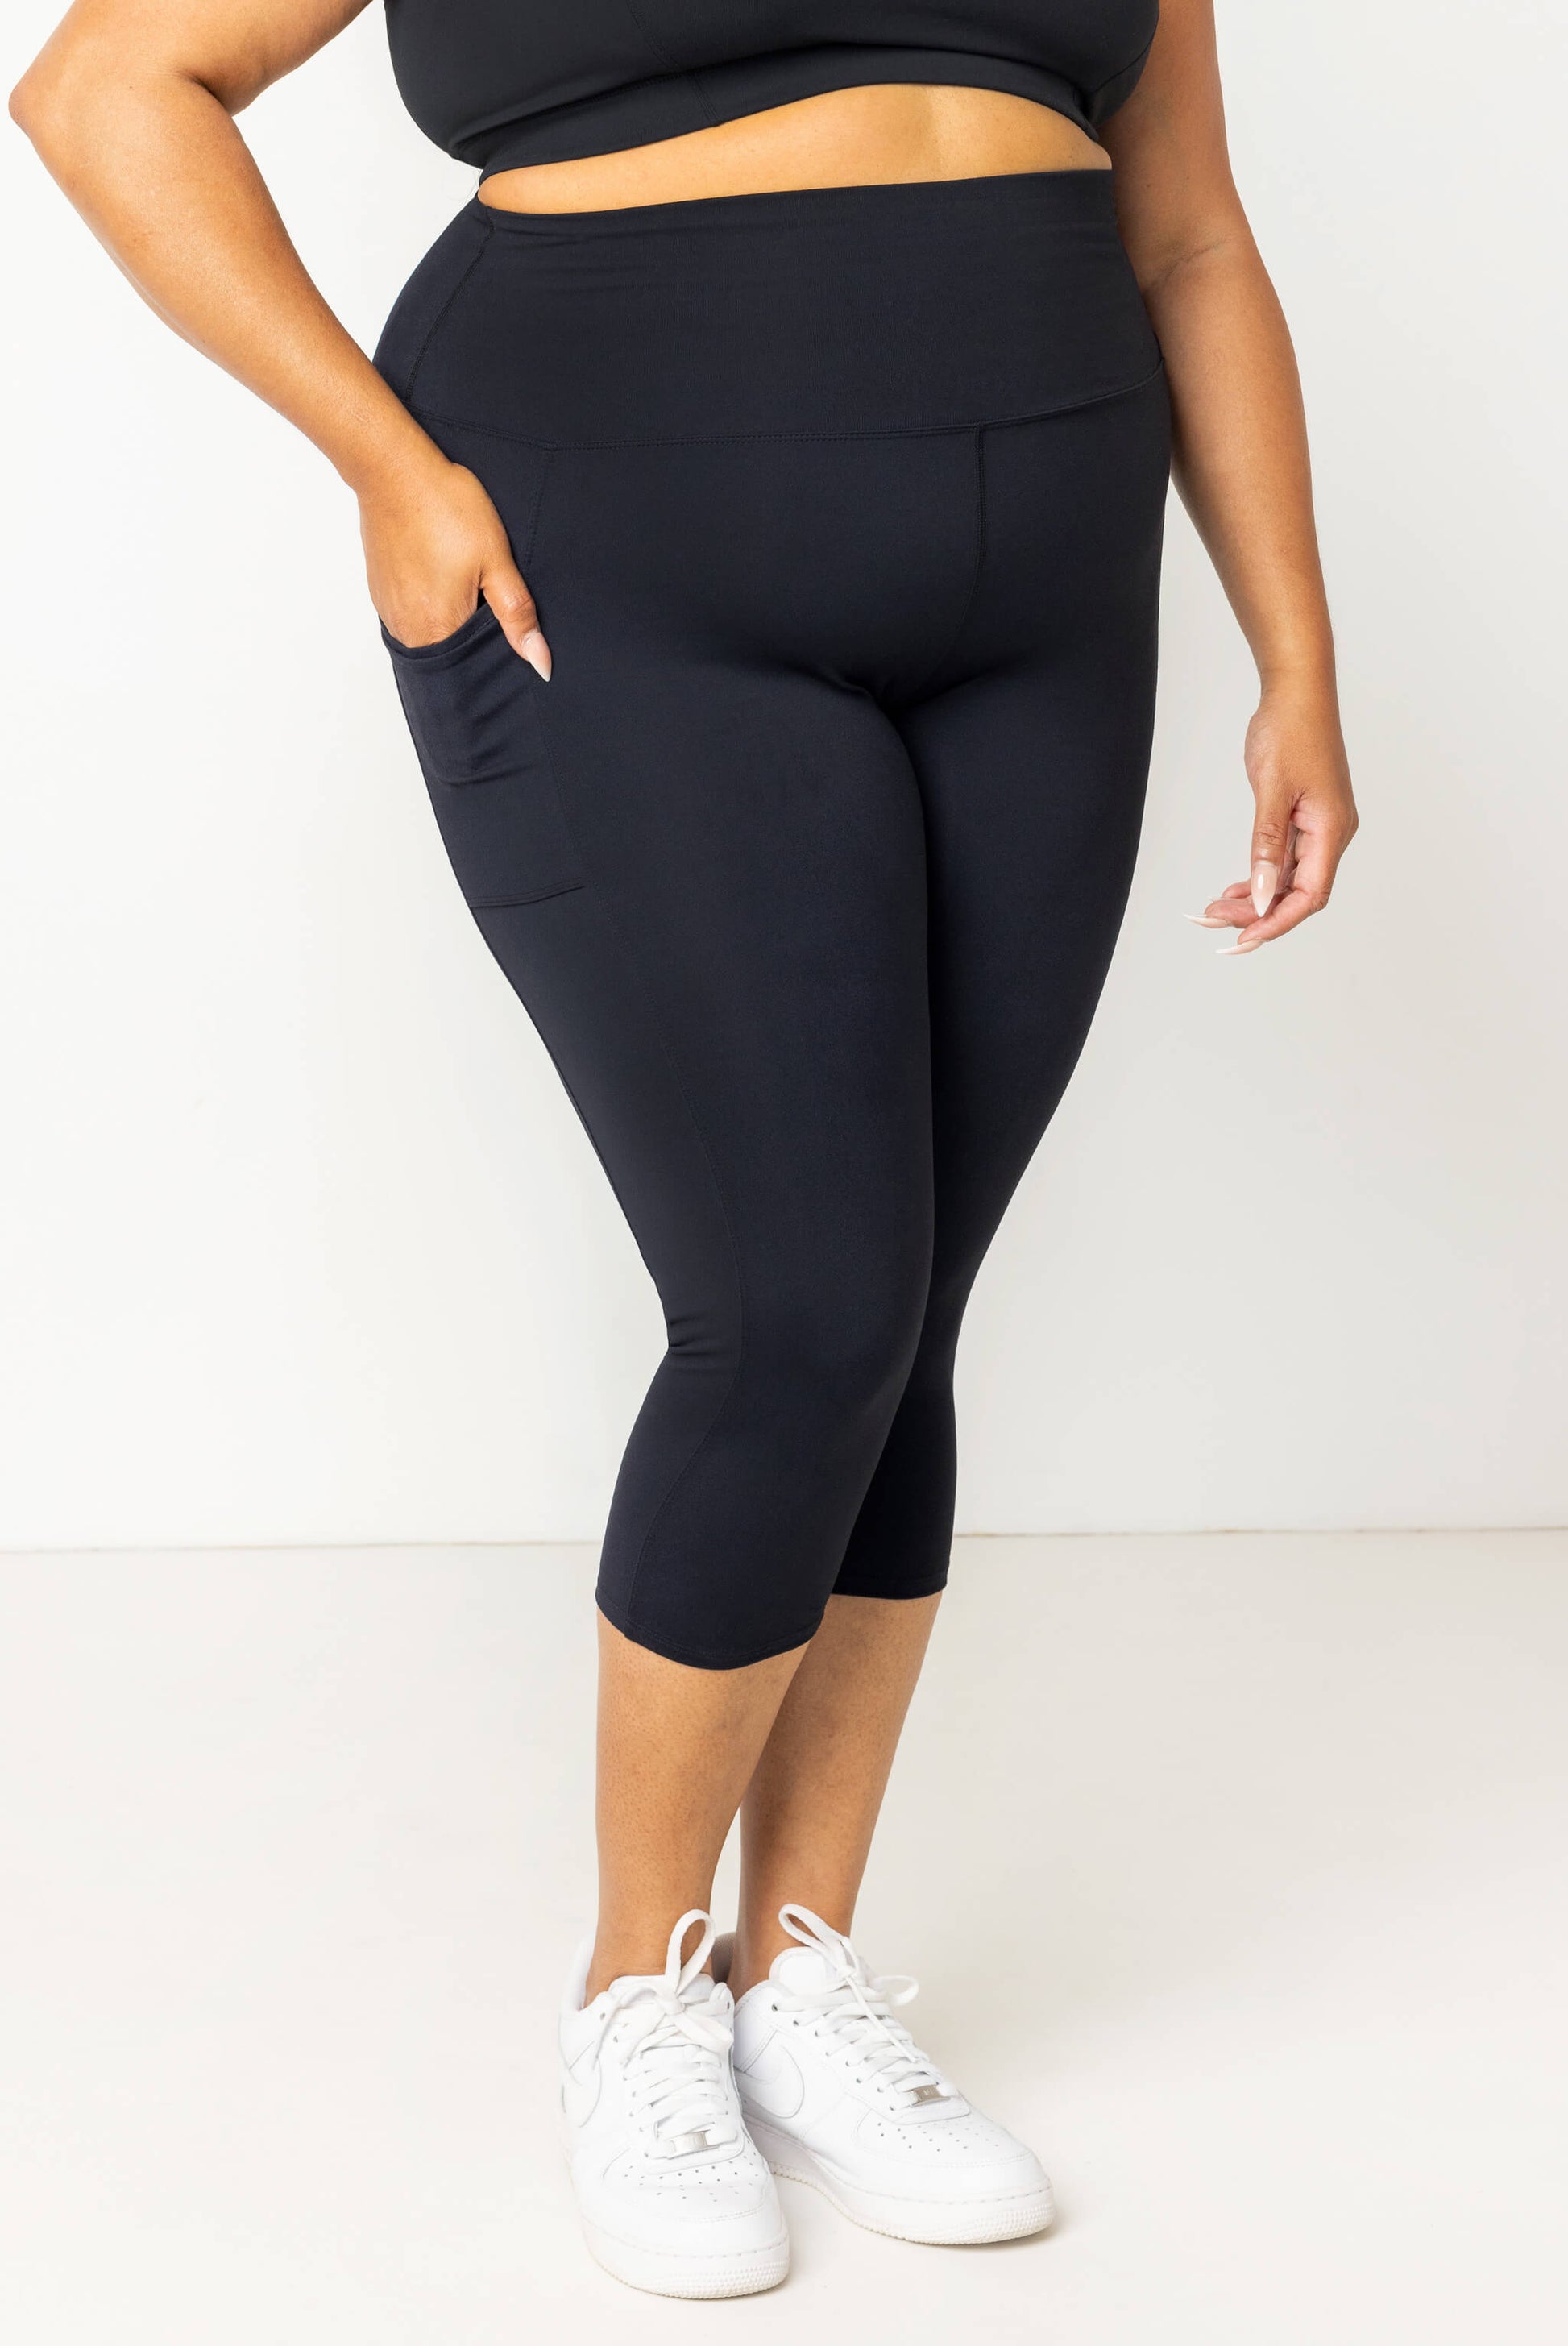 Black SuperHold capris with pockets in size 2X